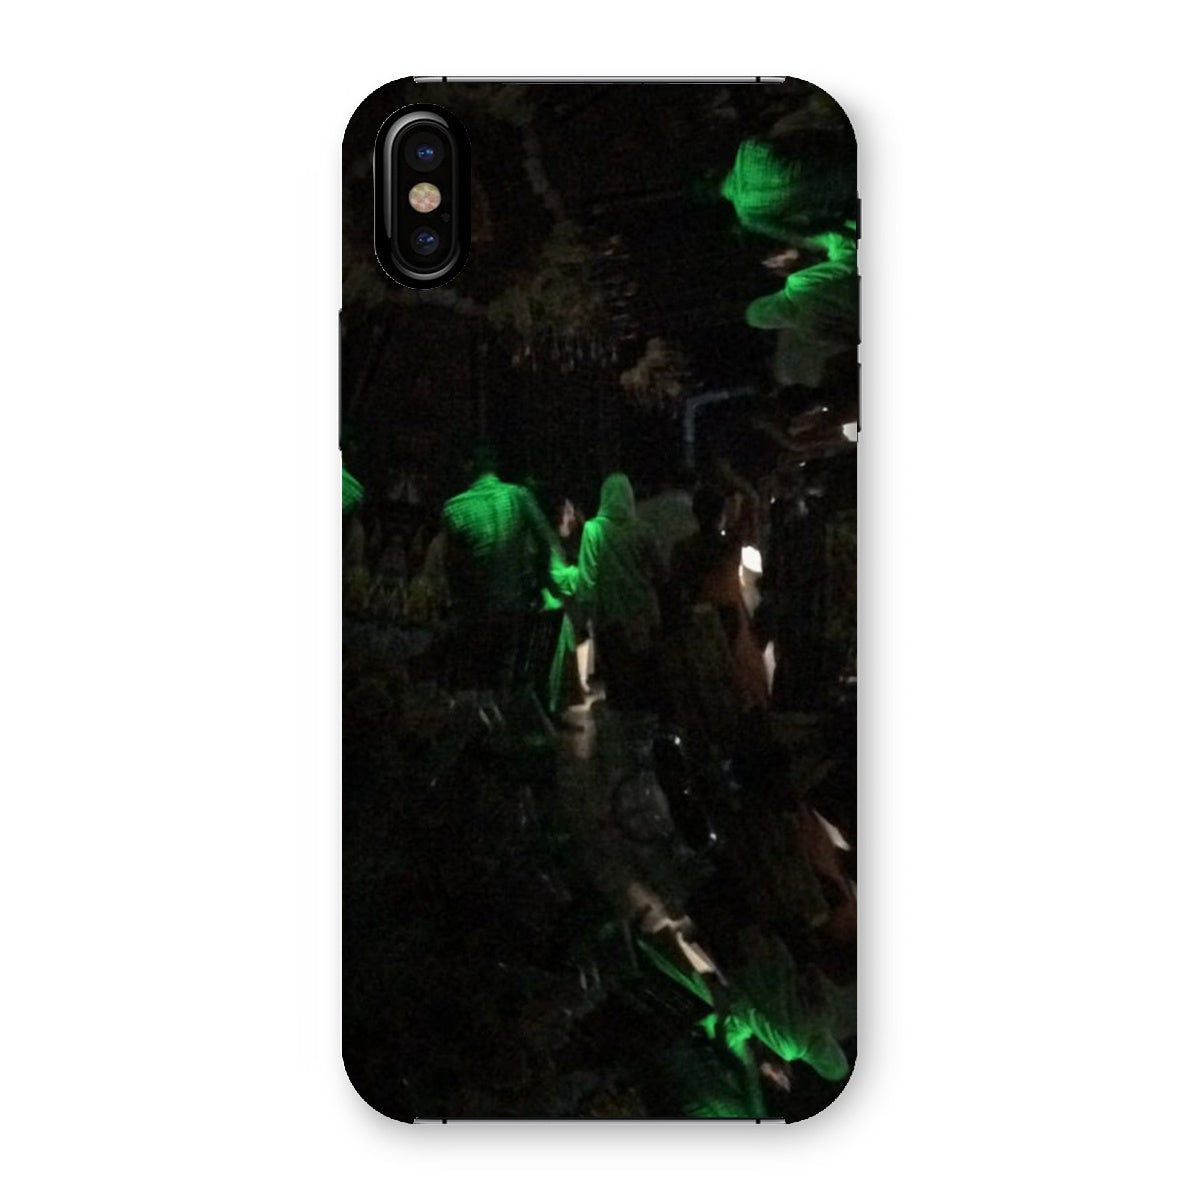 Nightlife Snap Phone Case - Durable and Lightweight Protection for Your Device, Goodies N Stuff